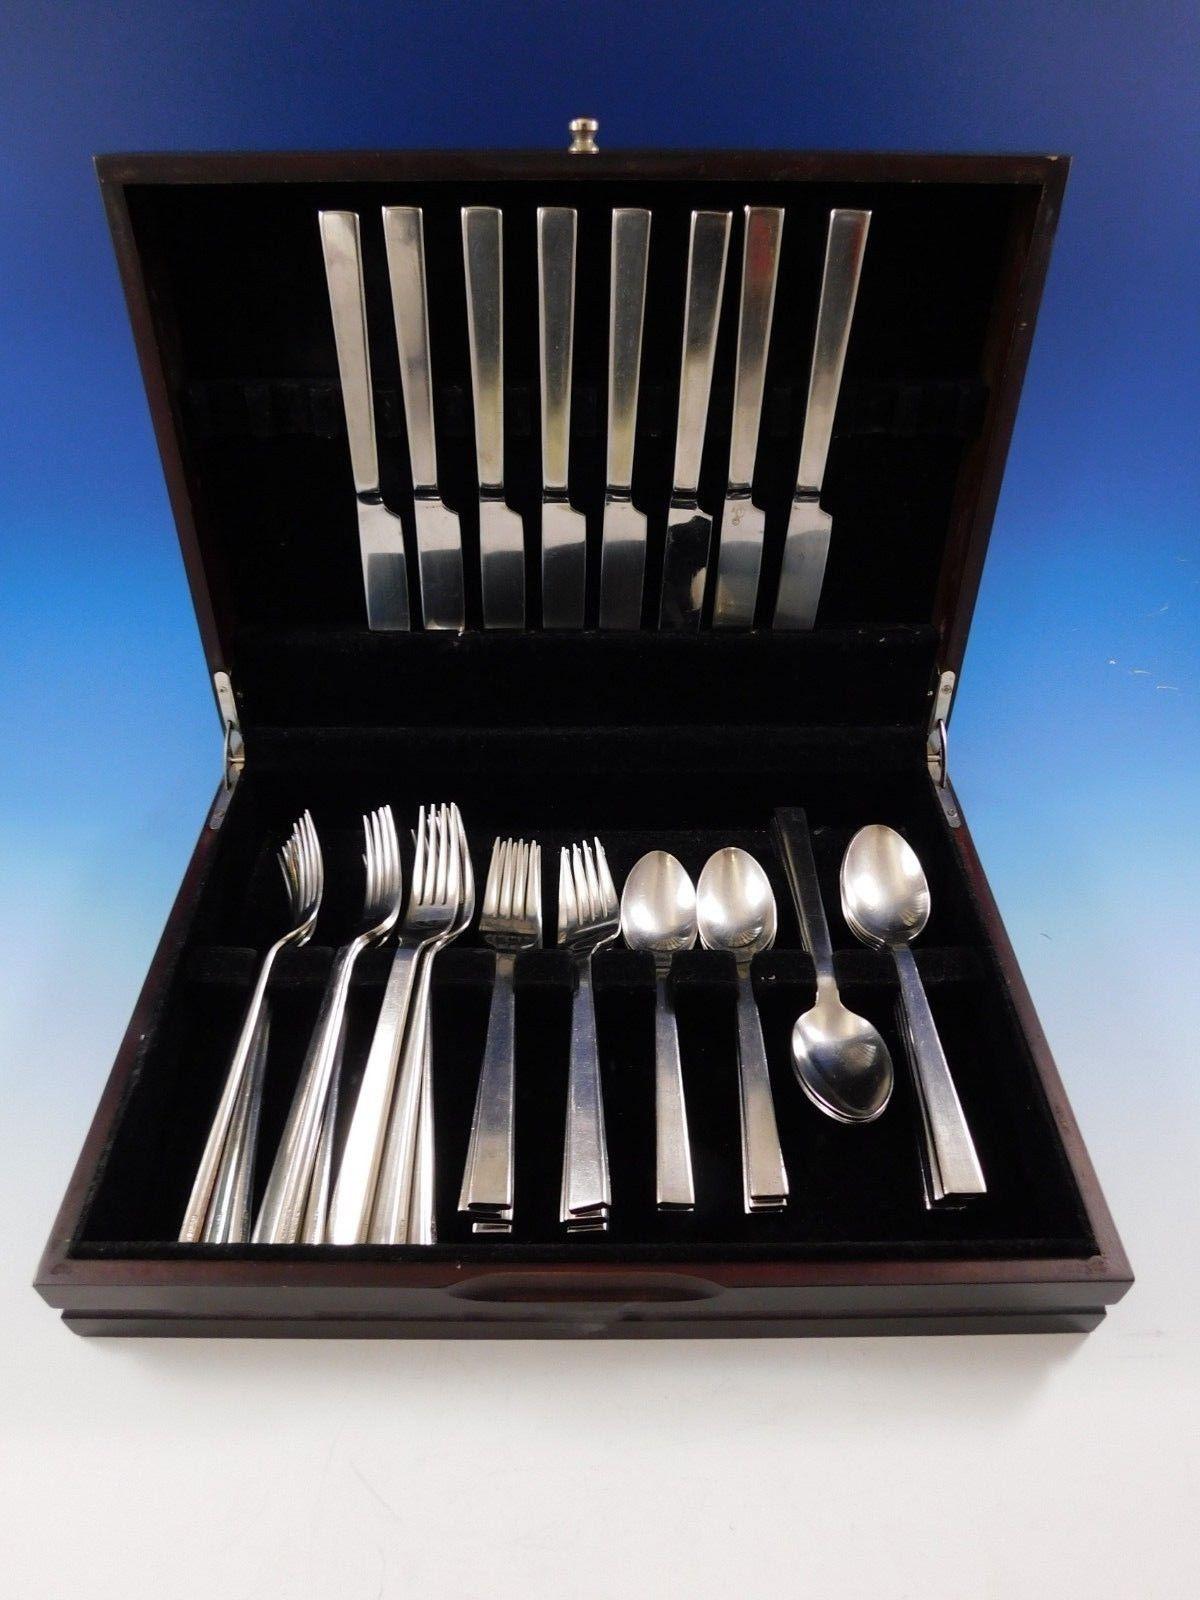 Academy by Ralph Lauren estate stainless steel flatware set, 42 pieces. This set includes:

8 dinner knives, 9 3/4